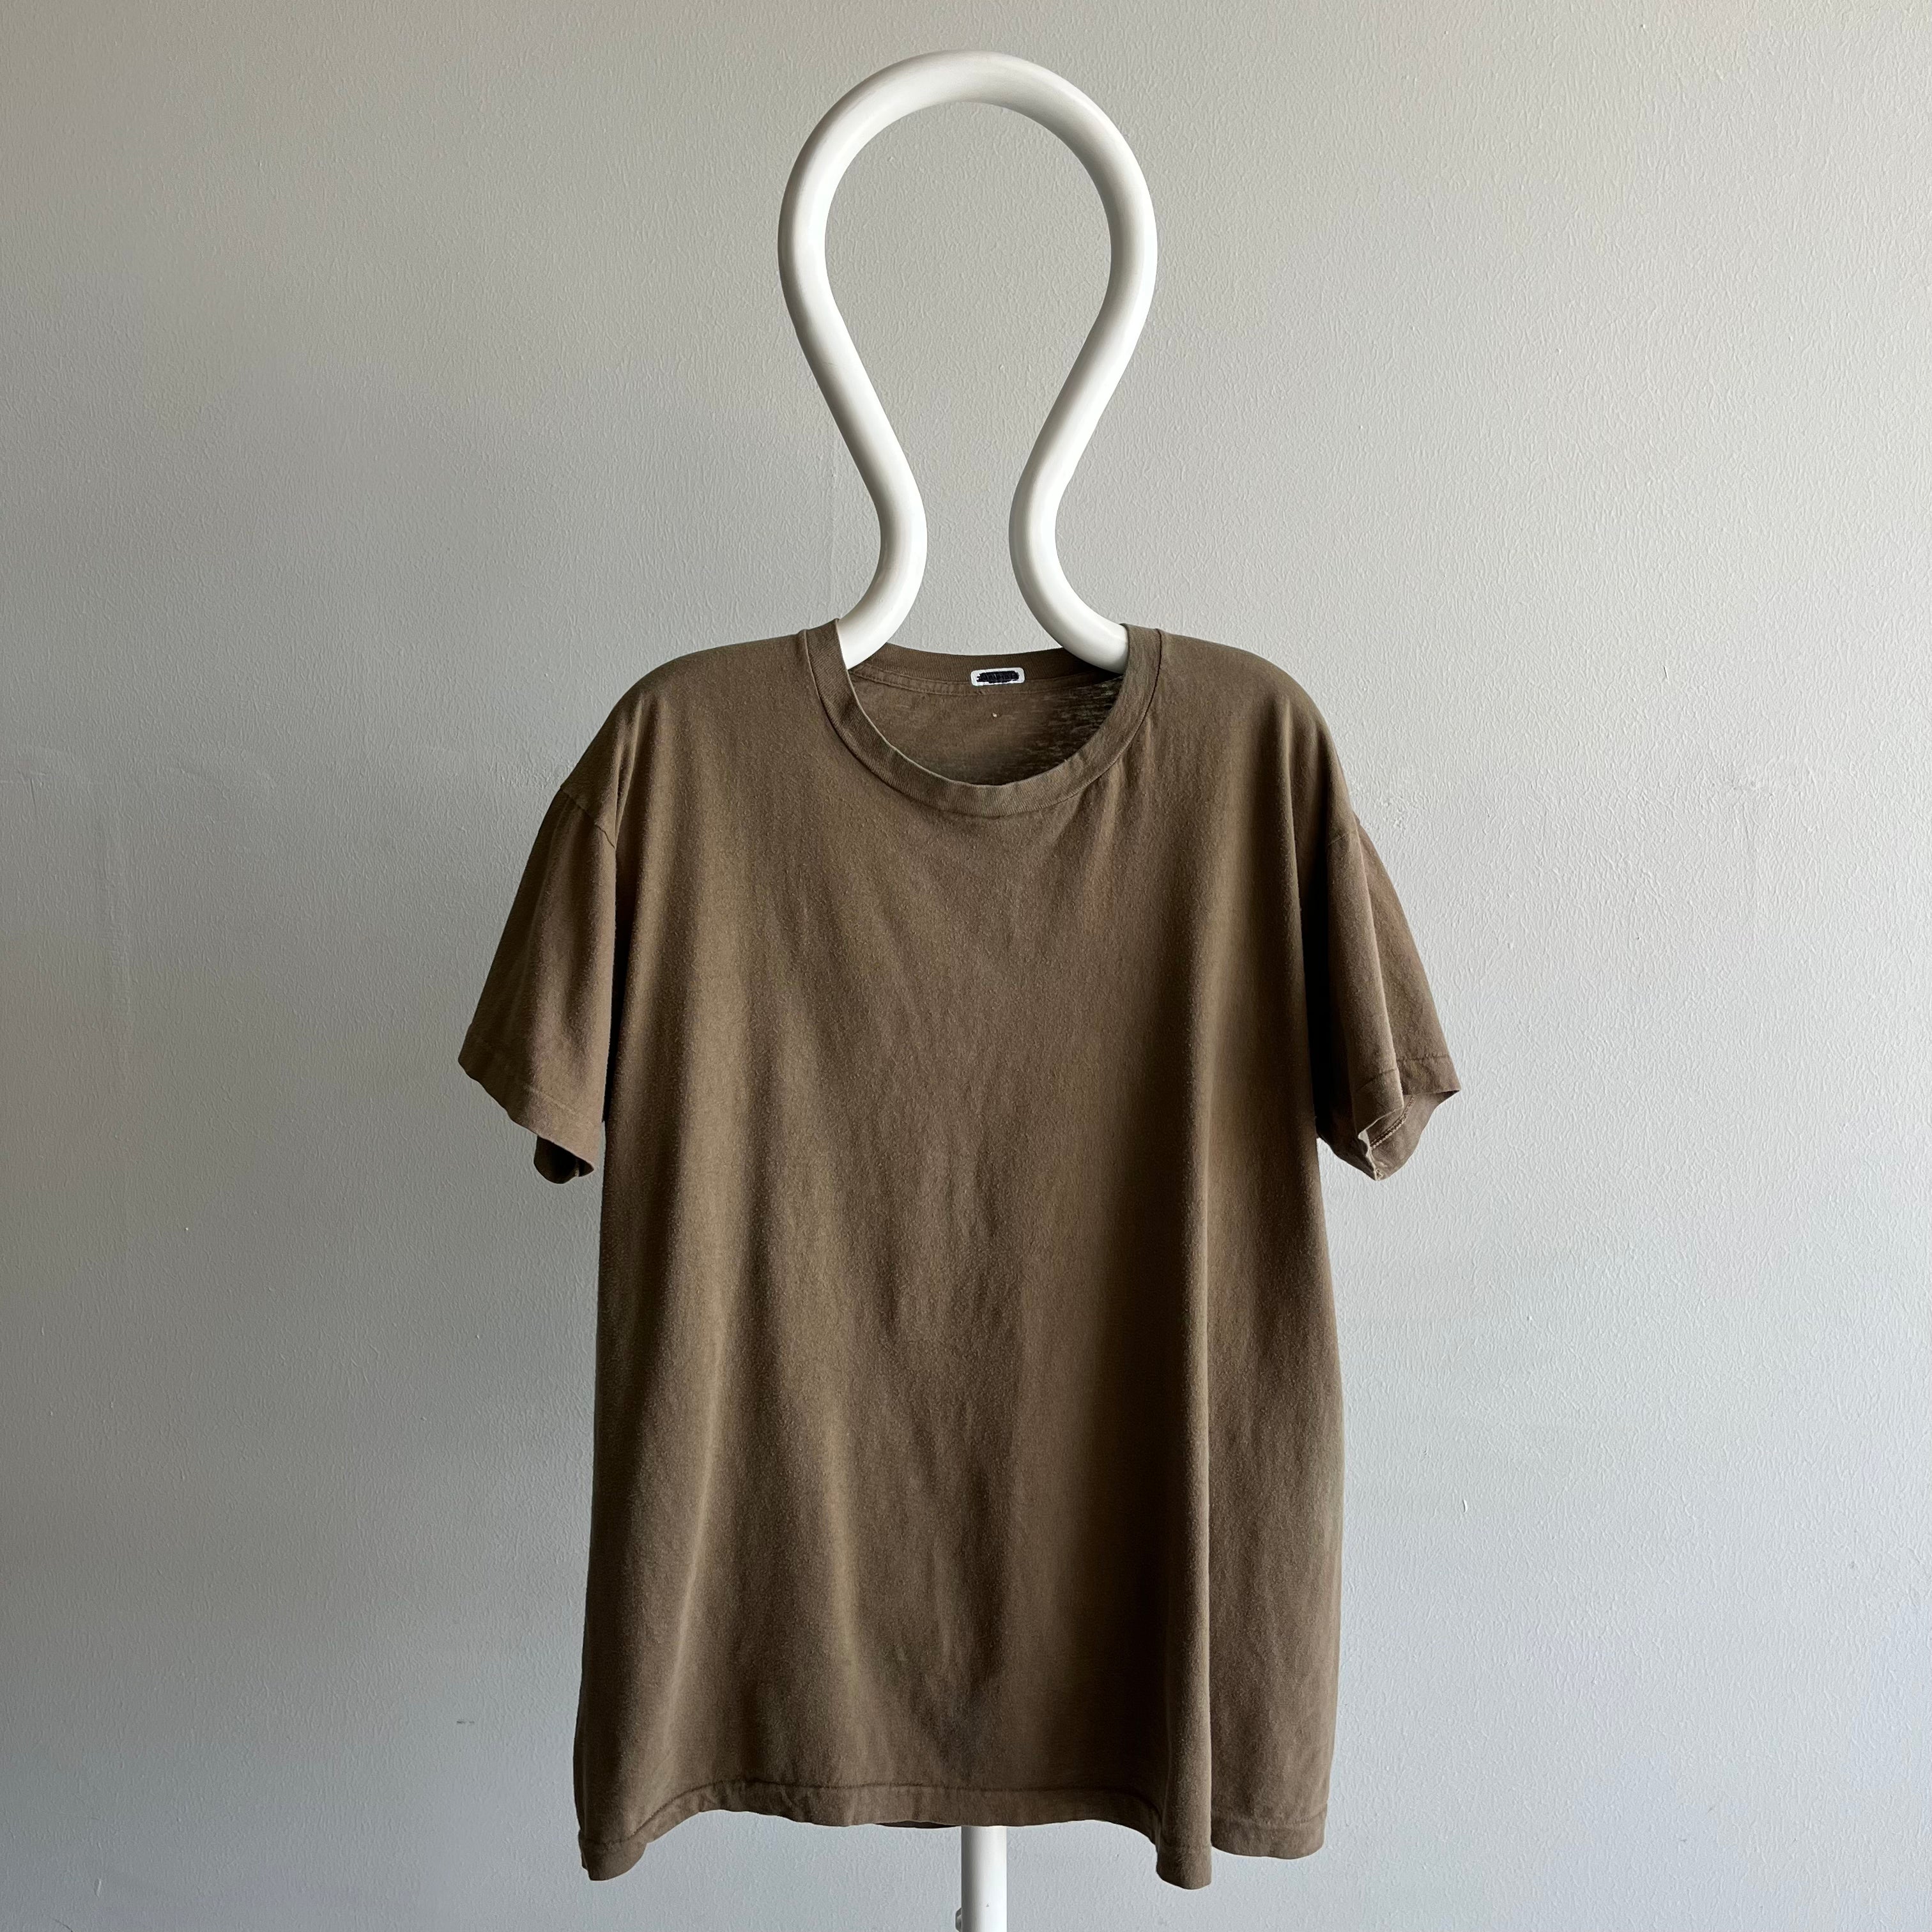 1980s Army Brown Cotton T-Shirt